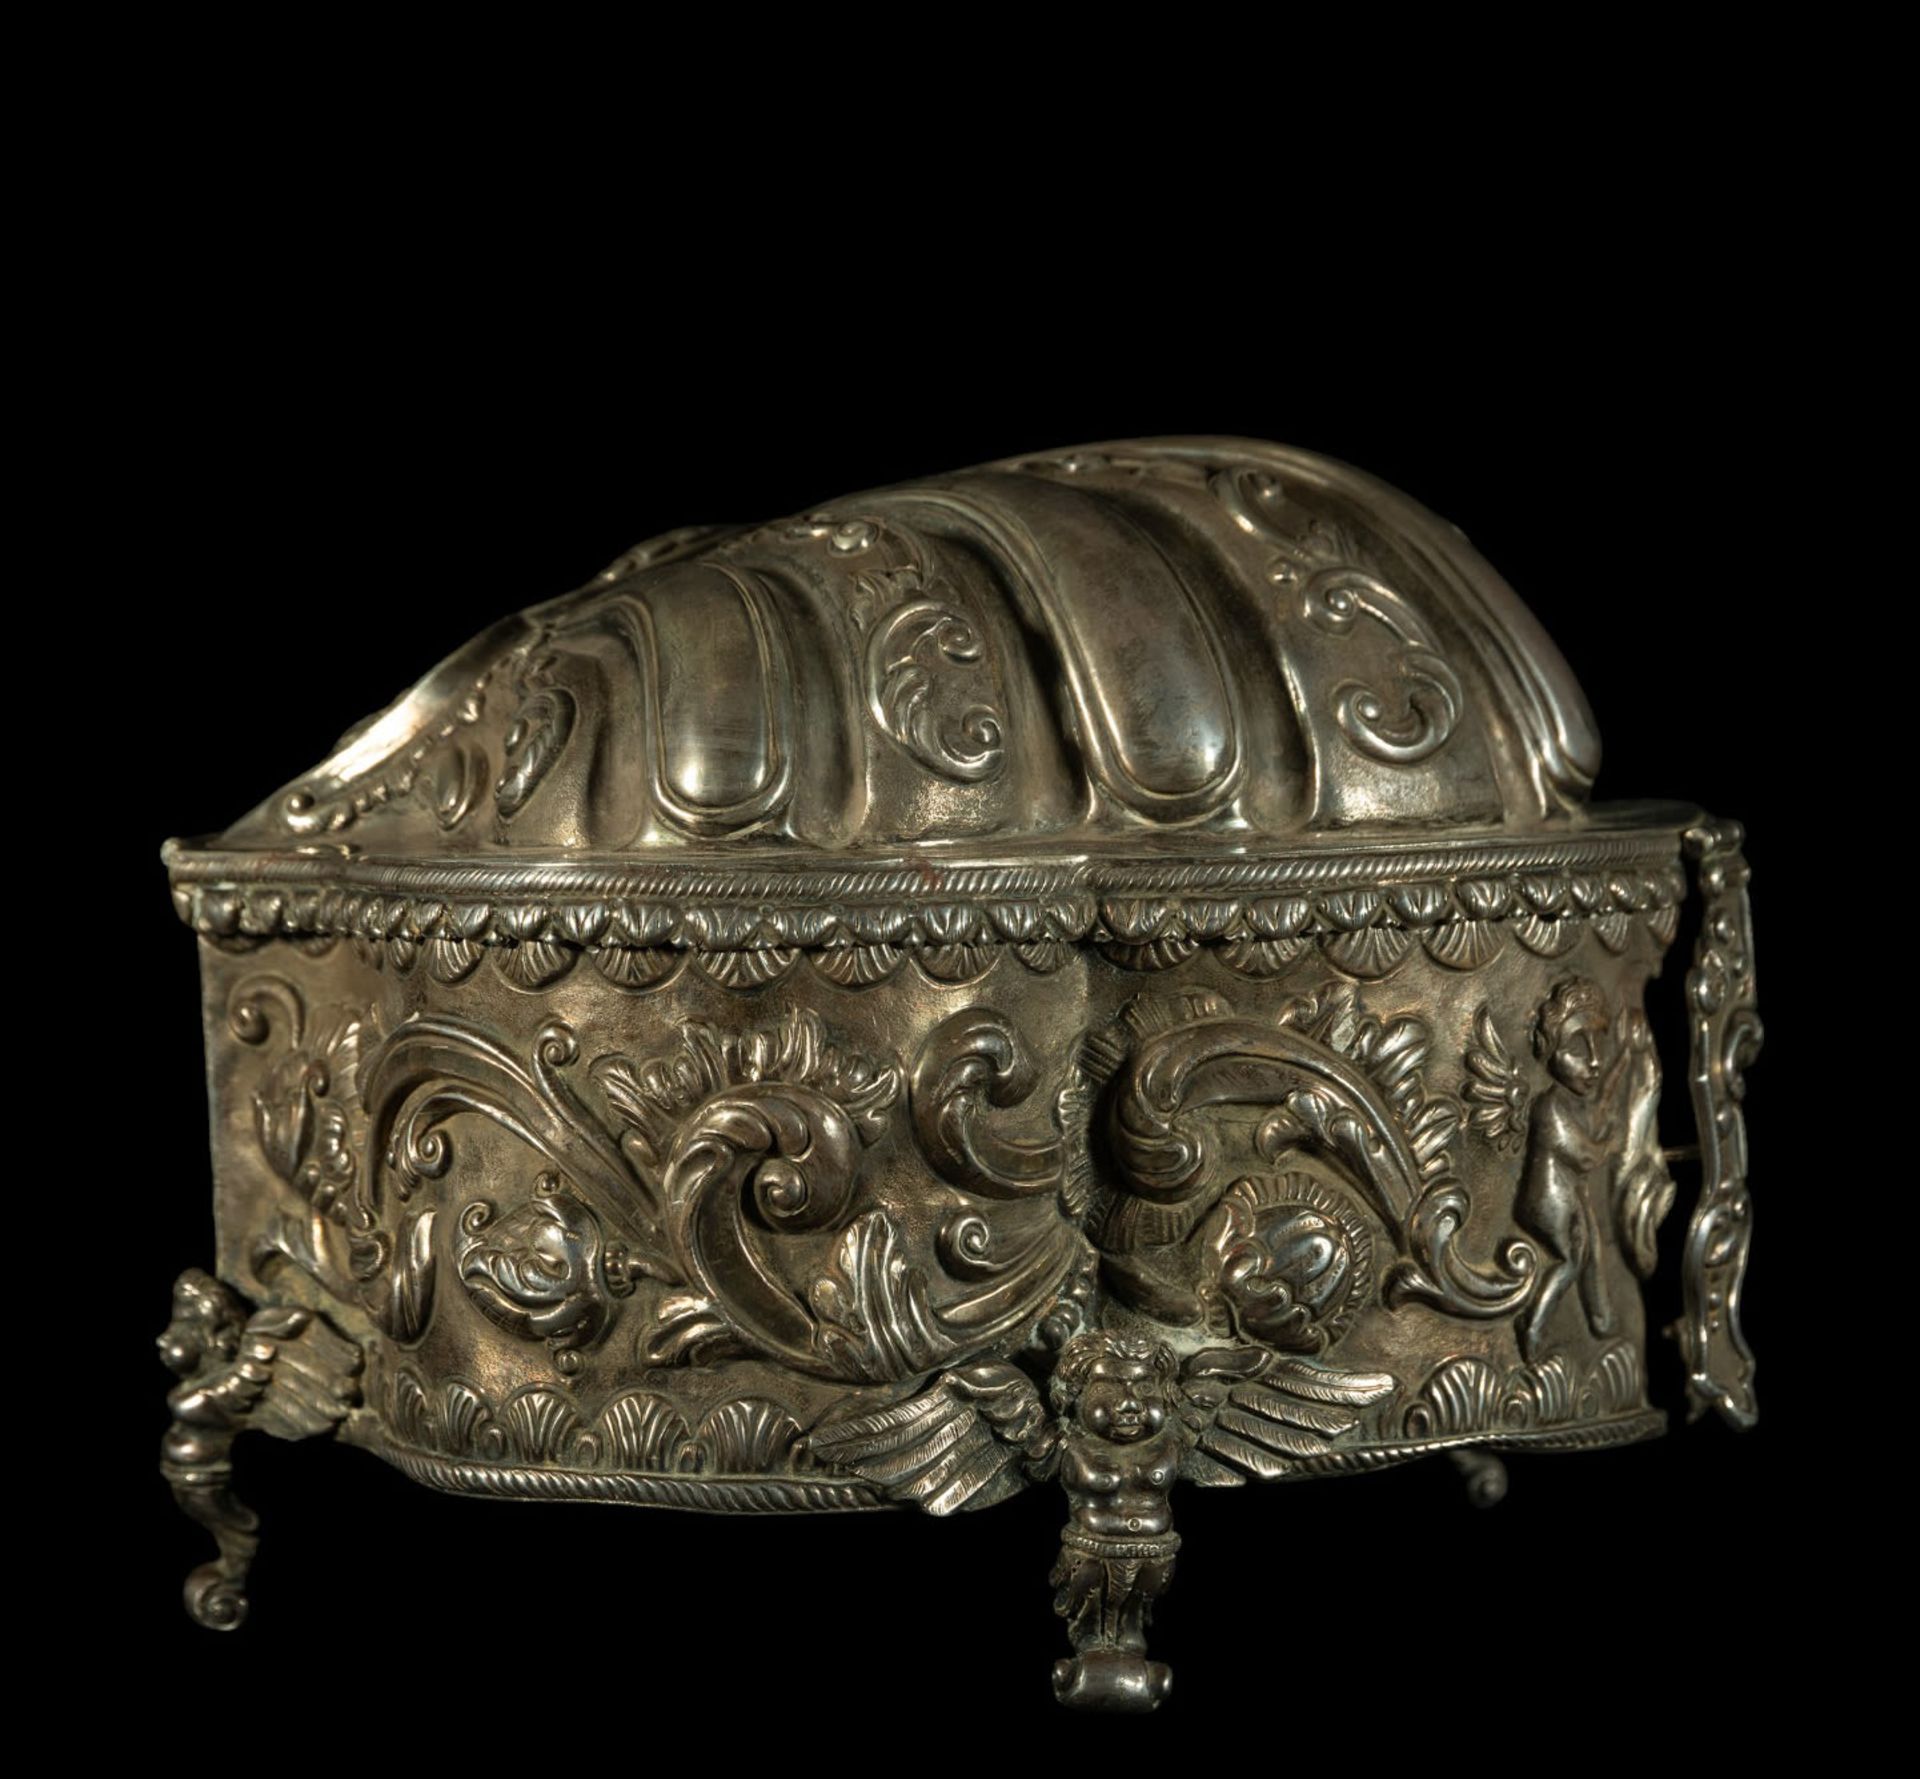 Rare colonial 1.315 Kg Fine Silver coke leaves box, Viceroyalty of Peru 17th century - Image 4 of 6